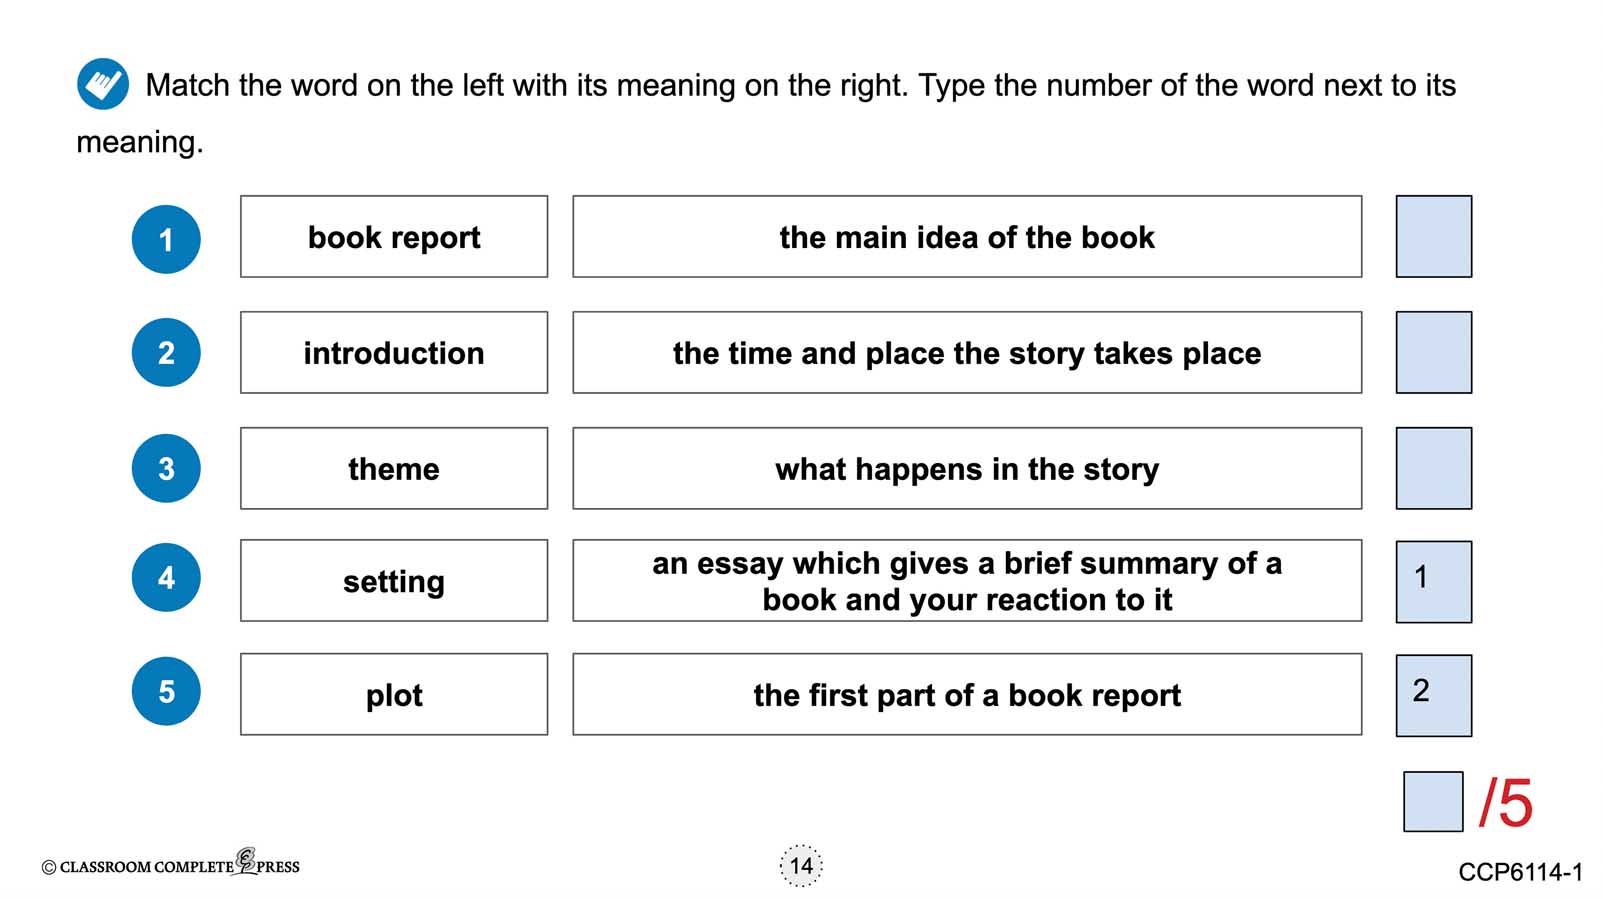 How to Write a Book Report: What is a Book Report? & Kinds of Book Reports - Google Slides Gr. 5-8 - eBook